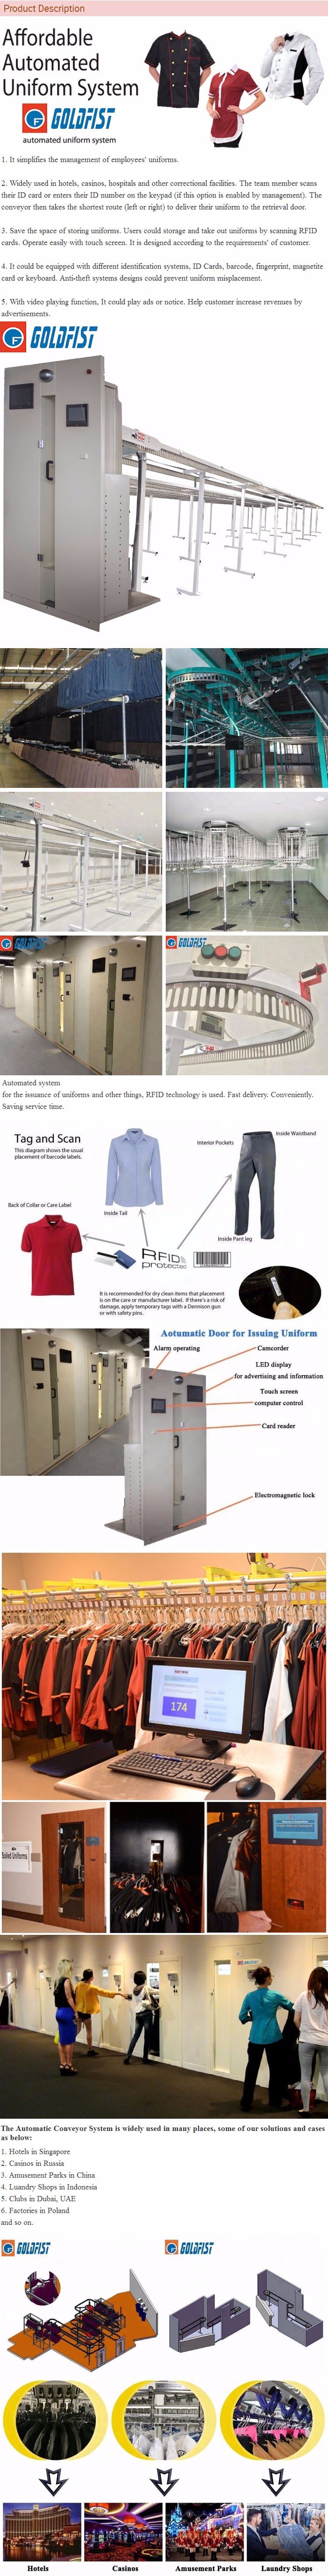 Cheap Portable Electric Laundry Hotel Logistics Services Room Uniforms Control System with Conveyor Belt